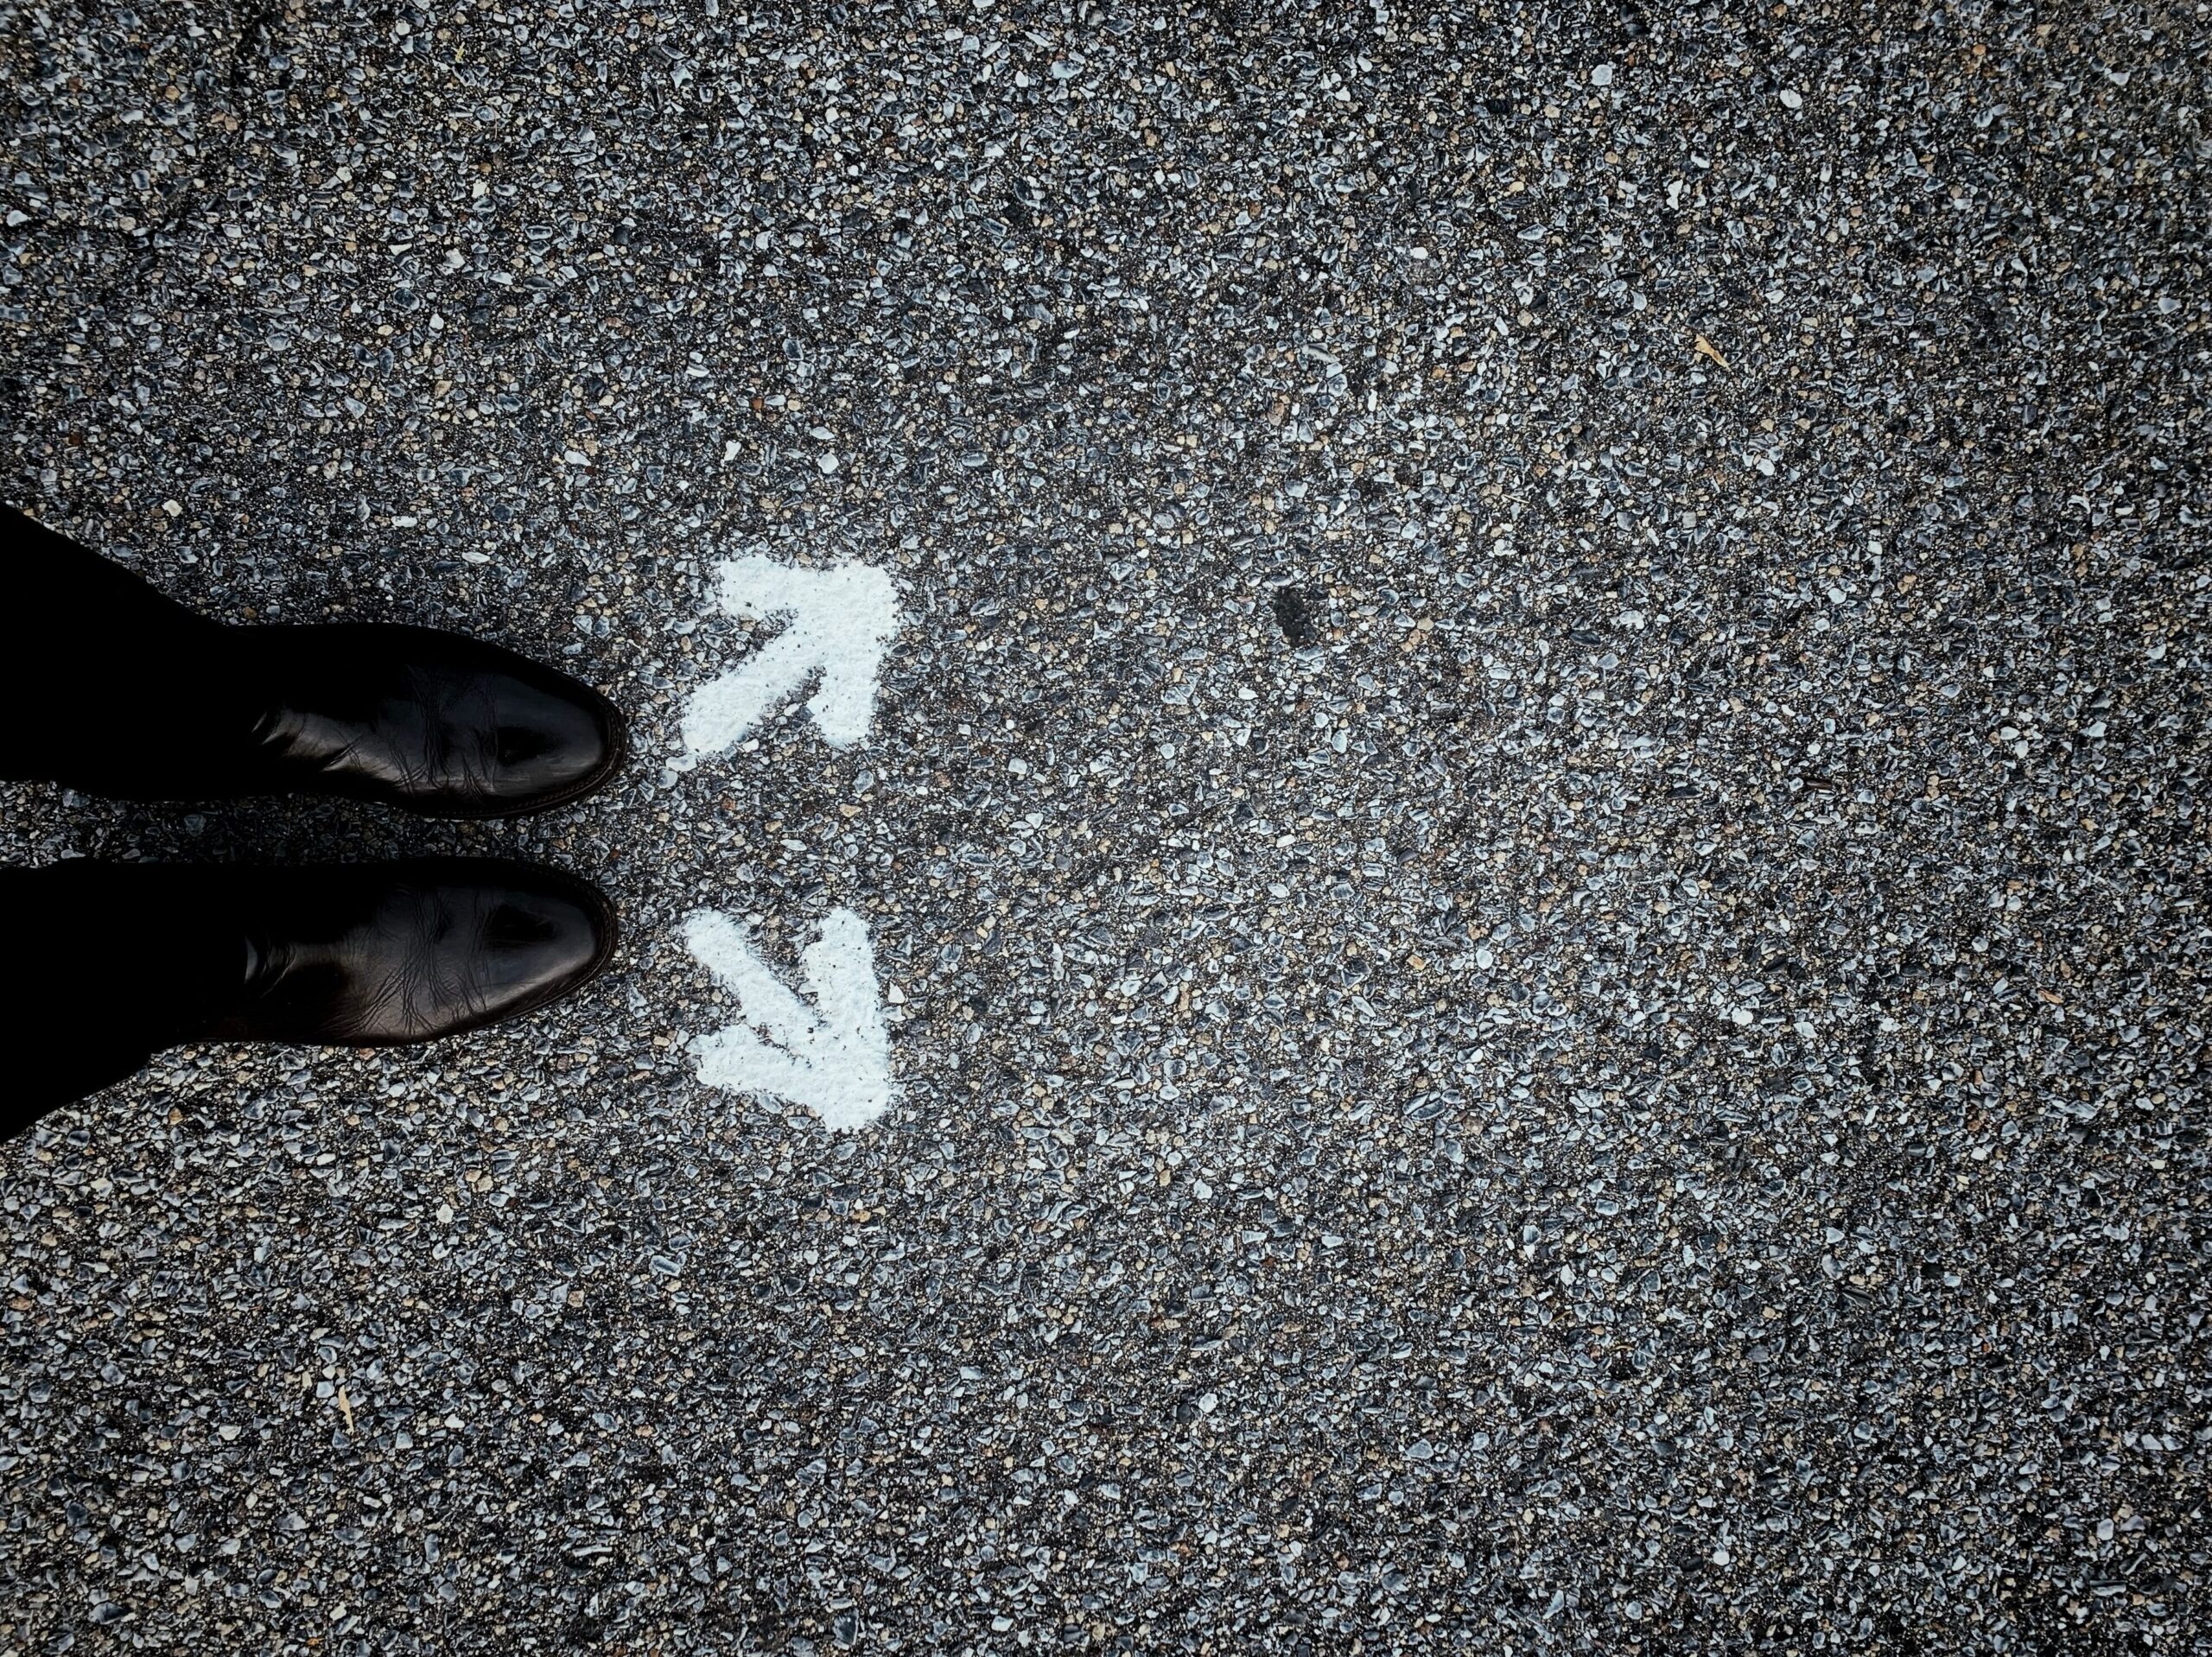 Picture from above of black shoes and bottom of black pants standing on black asphalt, with two white arrows painted on the asphalt just above the feet, one arrow pointing diagonally up and the other pointing diagonally down